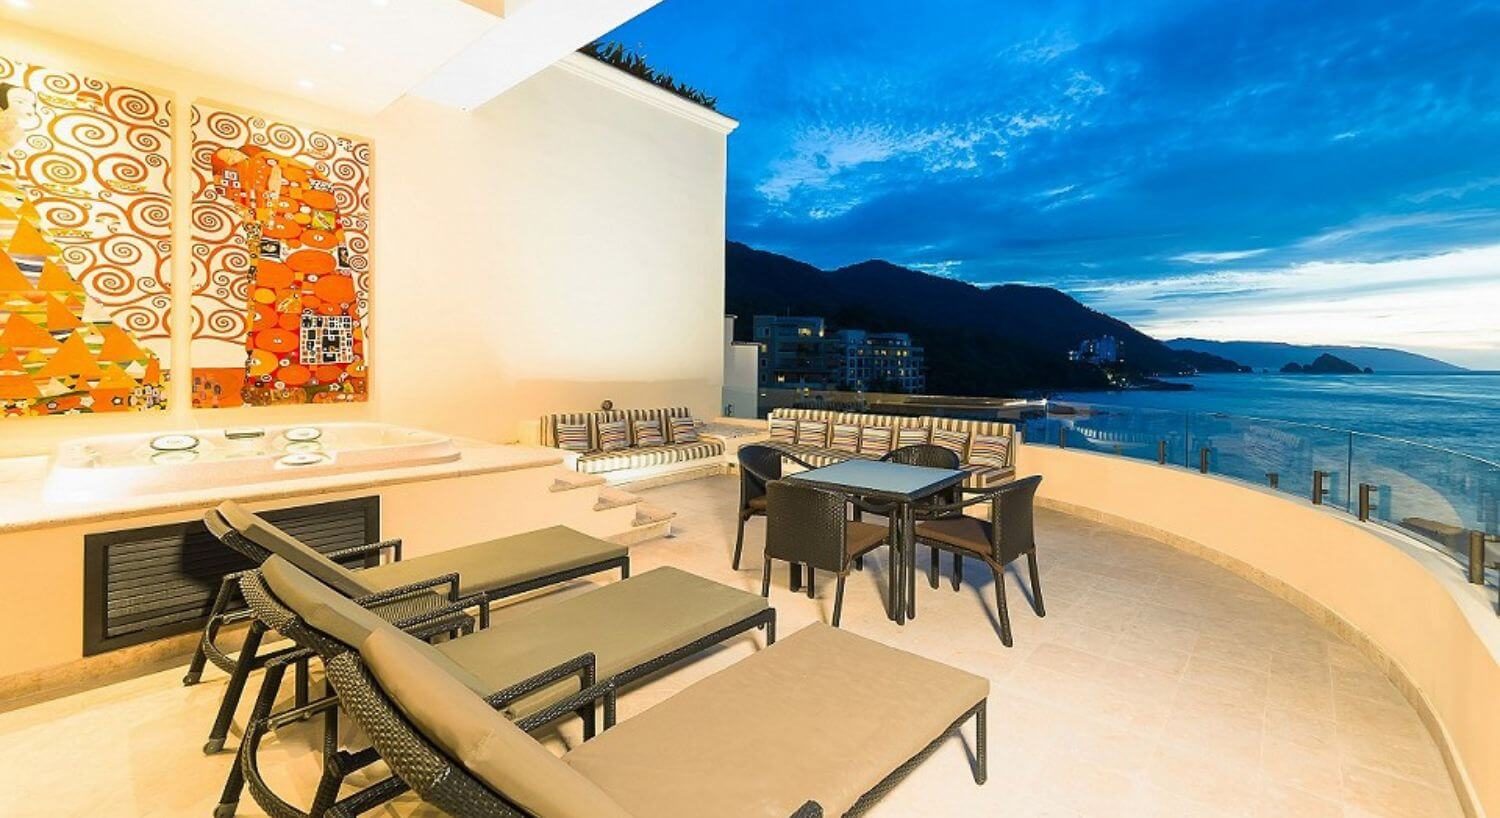 A private outdoor terrace with a hot tub, lounge chairs, table and chairs, sofas, and views of the ocean and mountains.